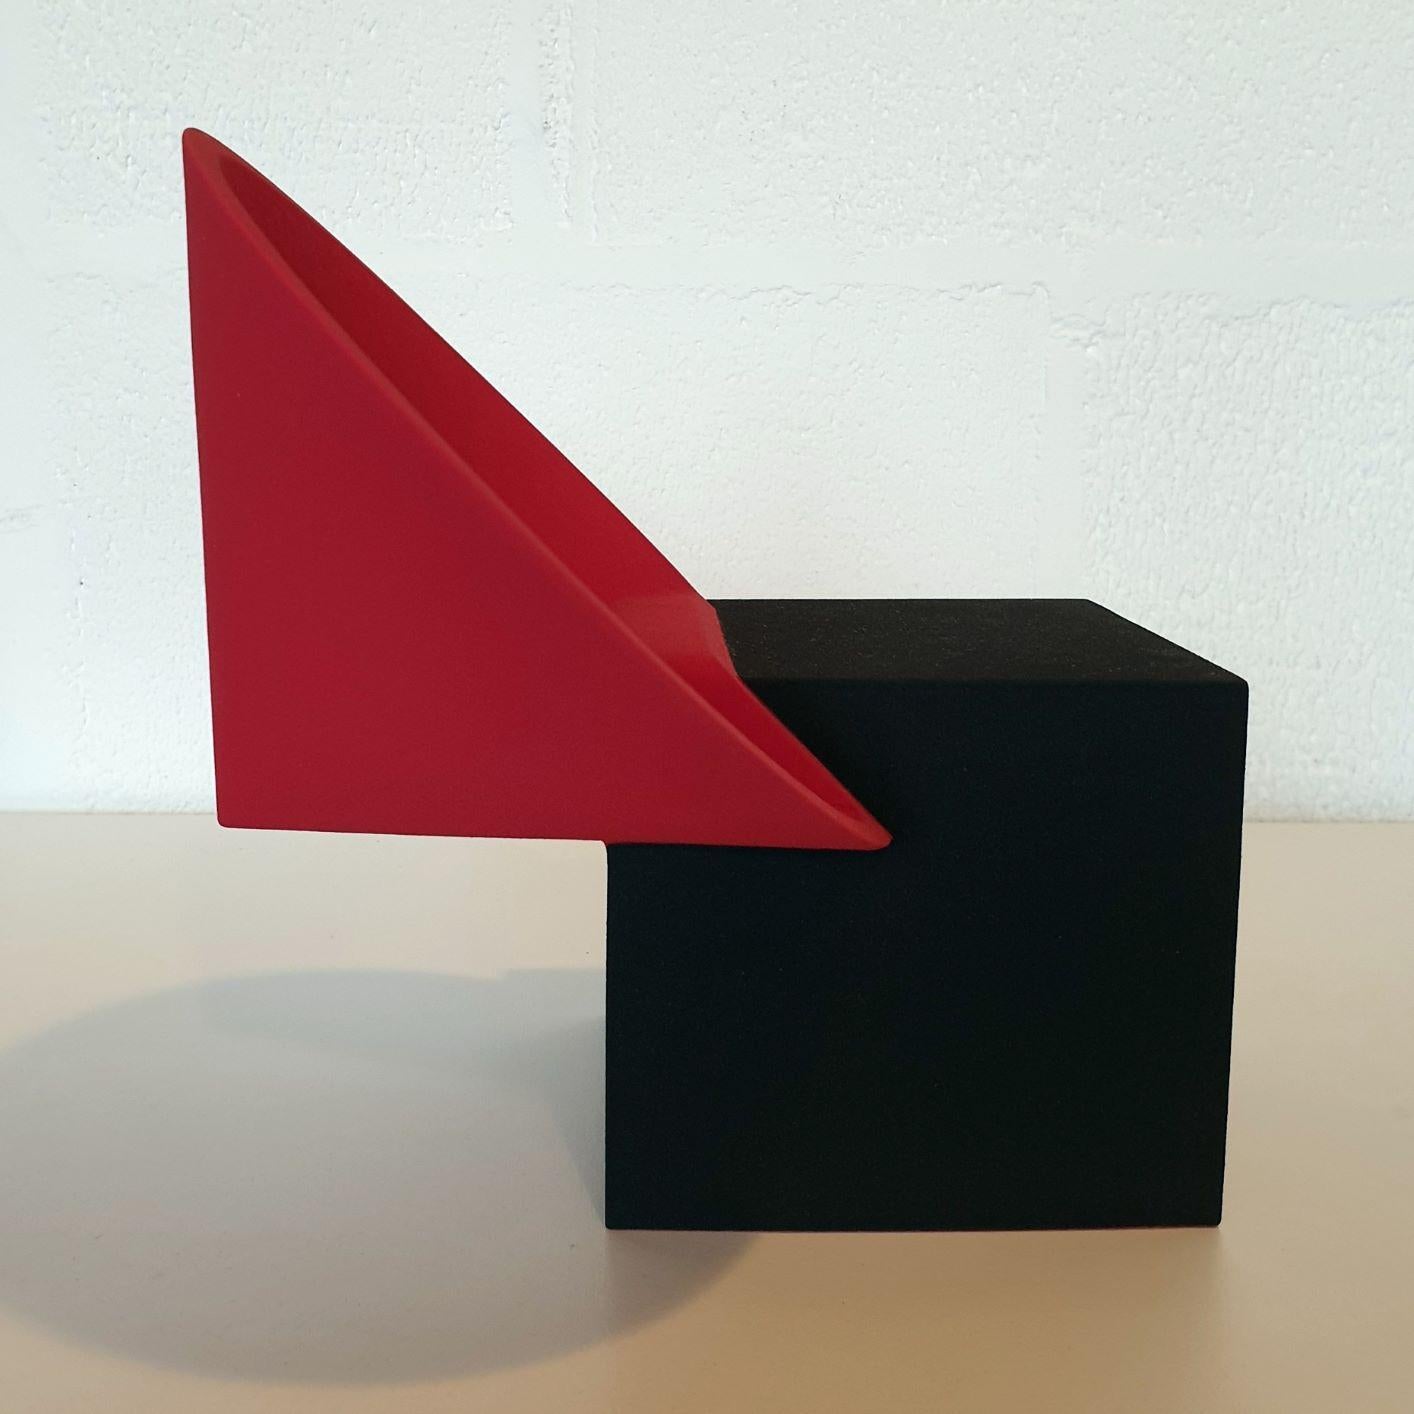 SC1601 red - contemporary modern abstract geometric ceramic object sculpture - Contemporary Sculpture by Let de Kok